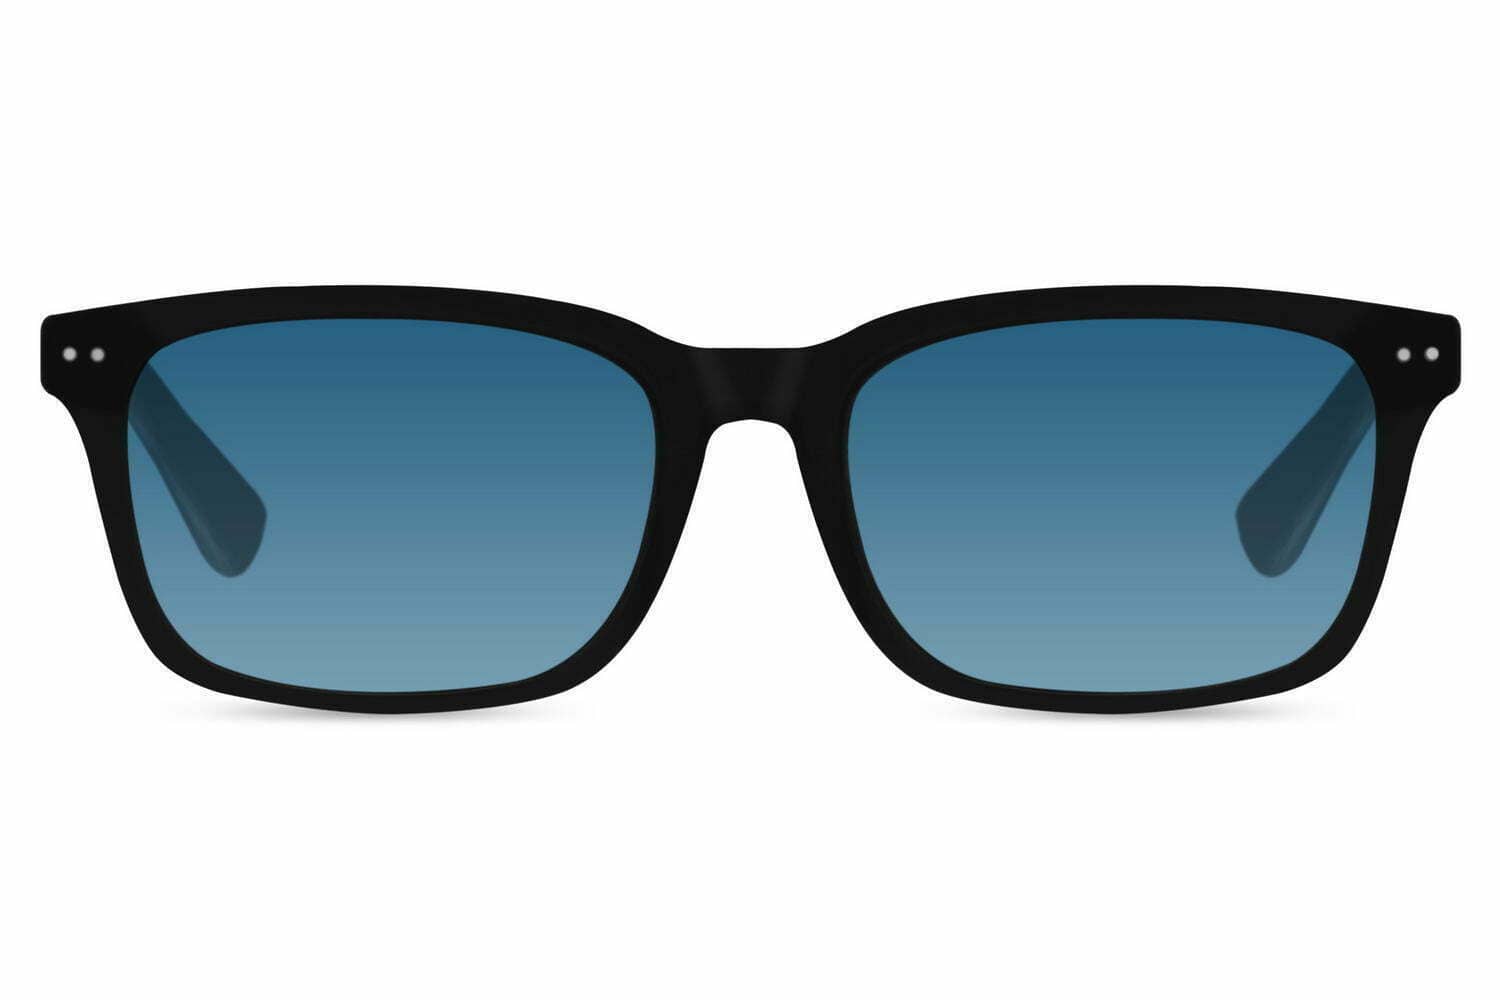 Orithia sunglasses with Blue color lens and Black color frame